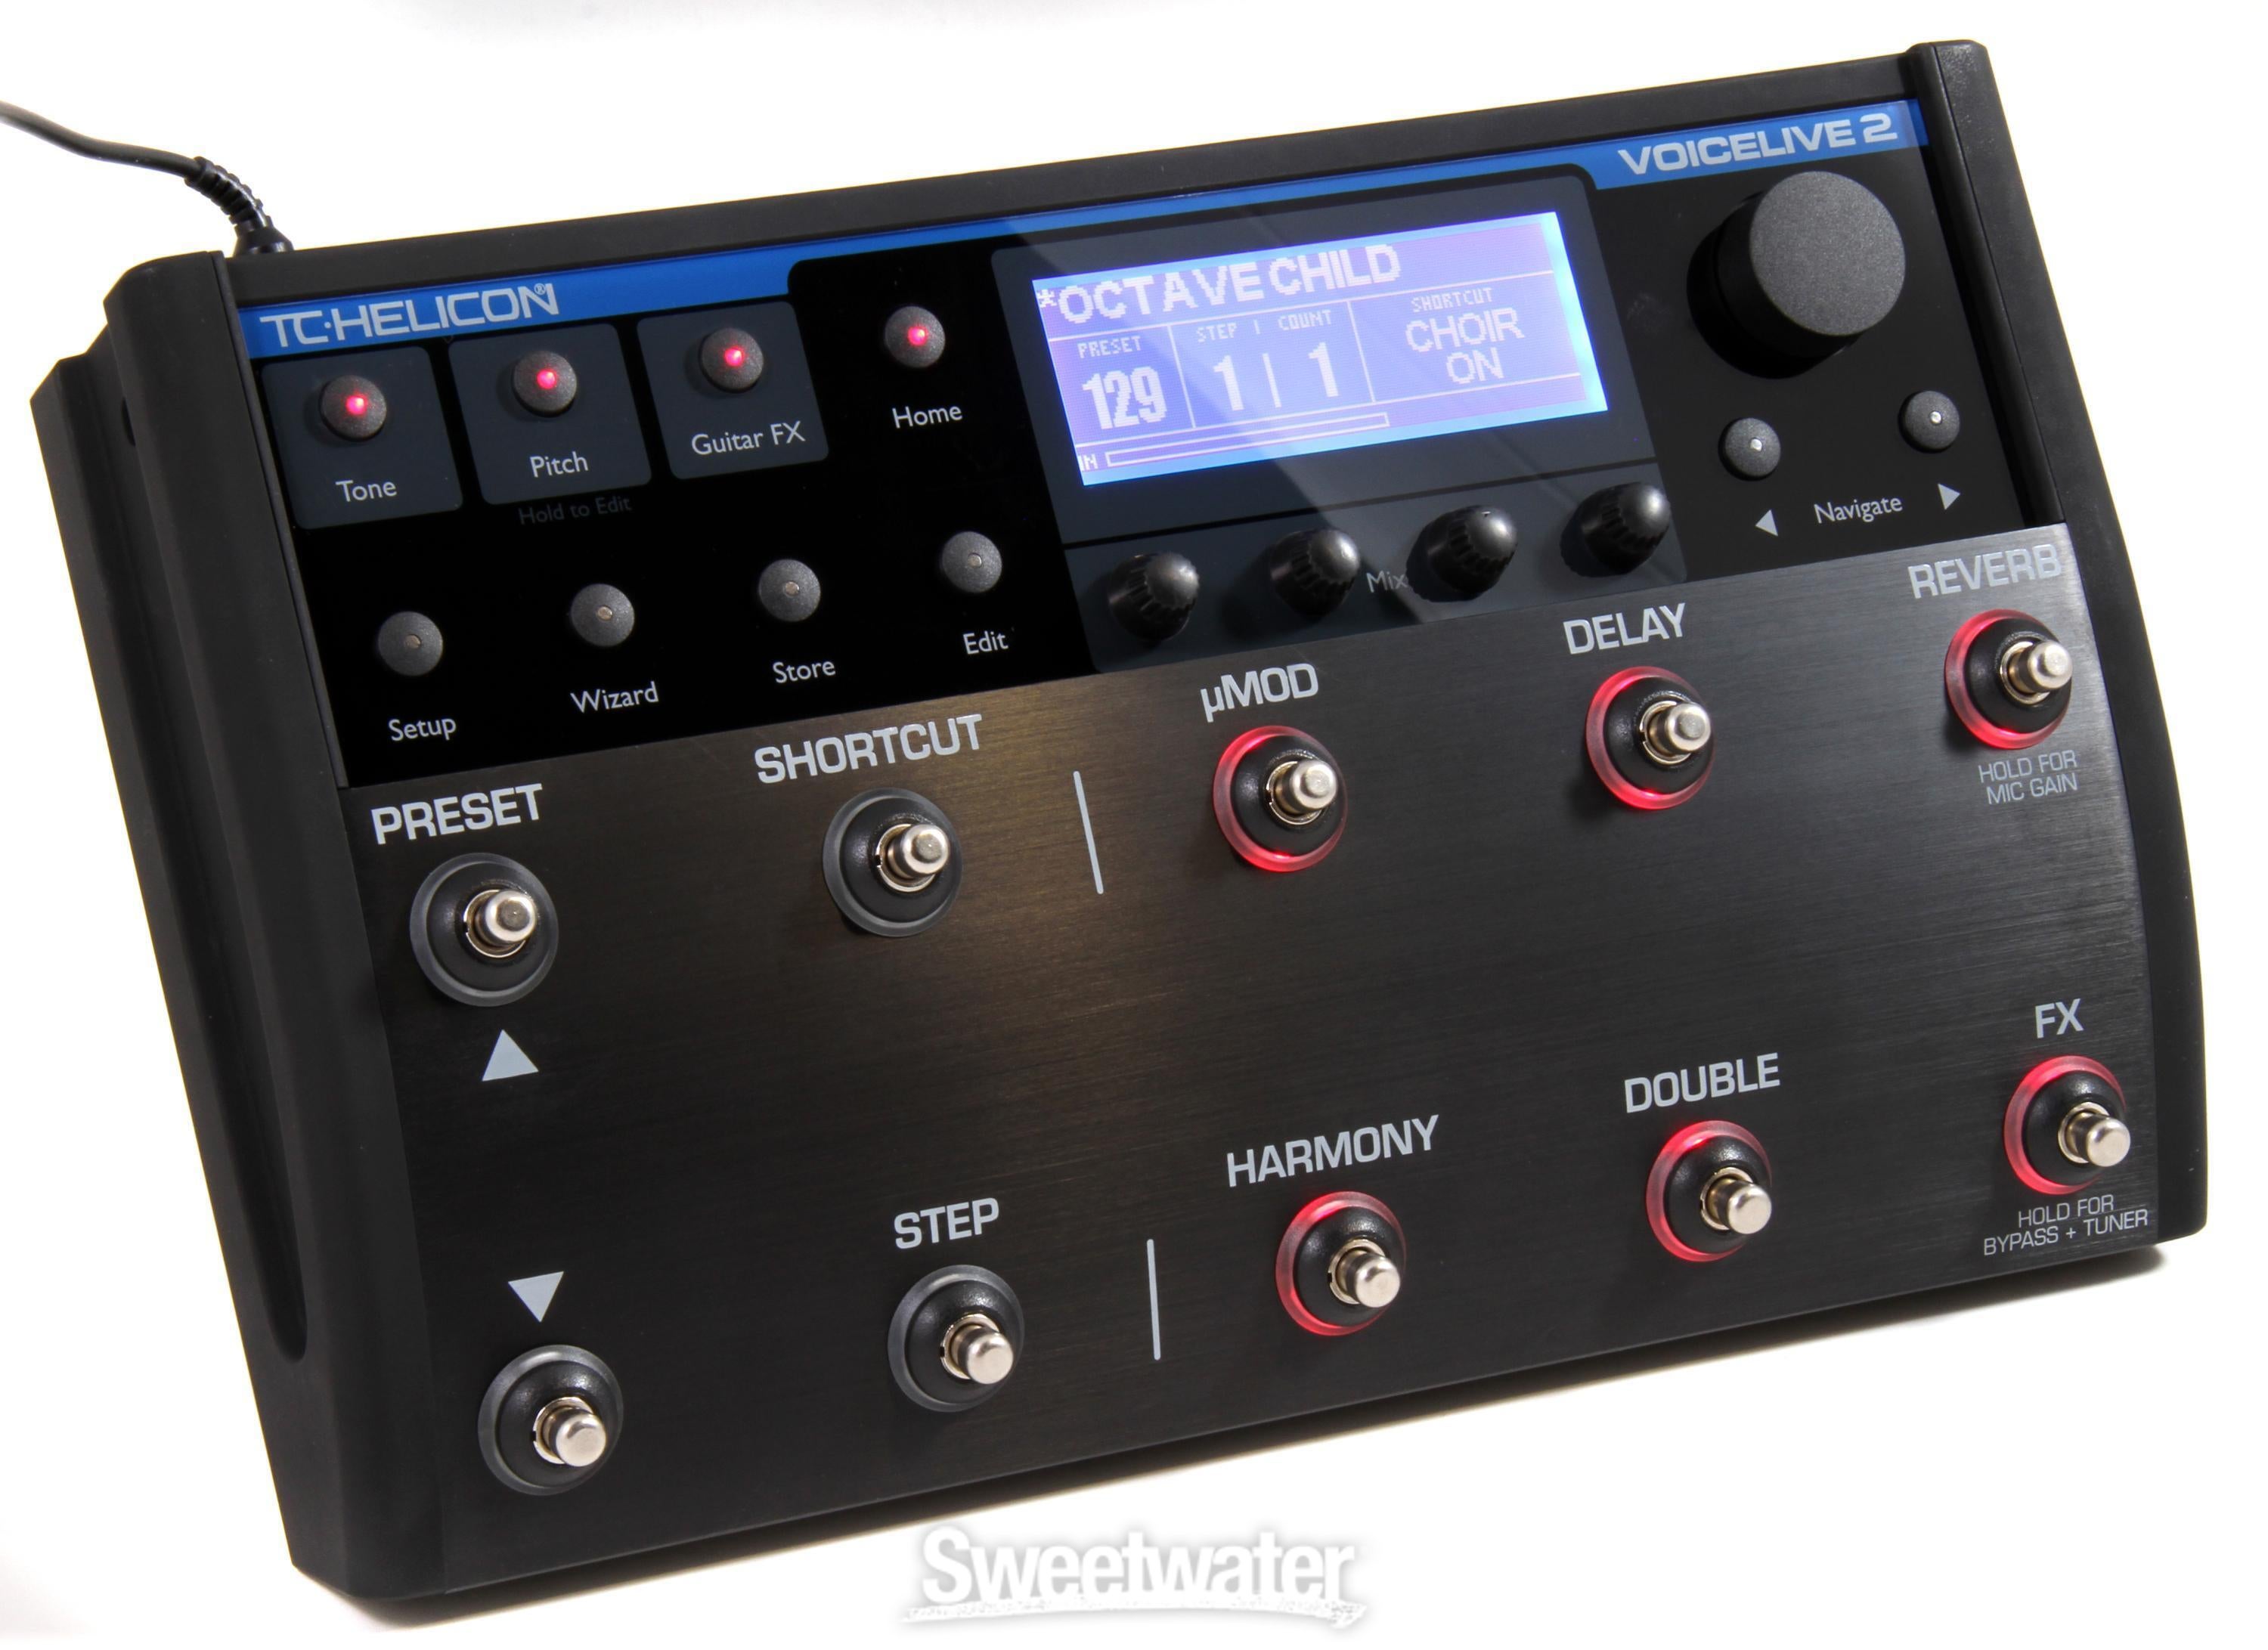 TC-Helicon VoiceLive 2 Reviews | Sweetwater